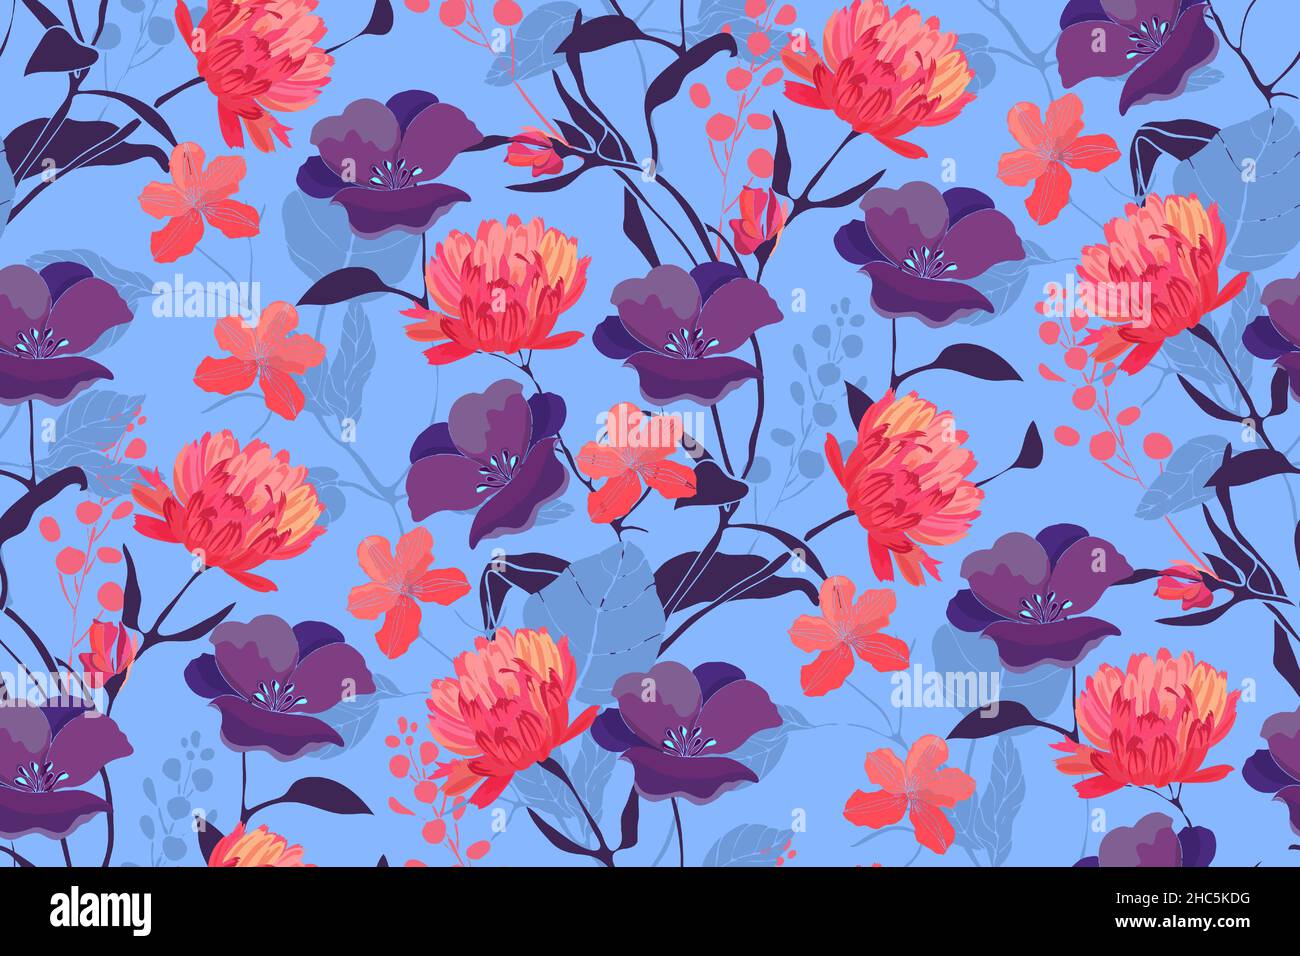 Art floral vector seamless pattern with flowers. Stock Vector